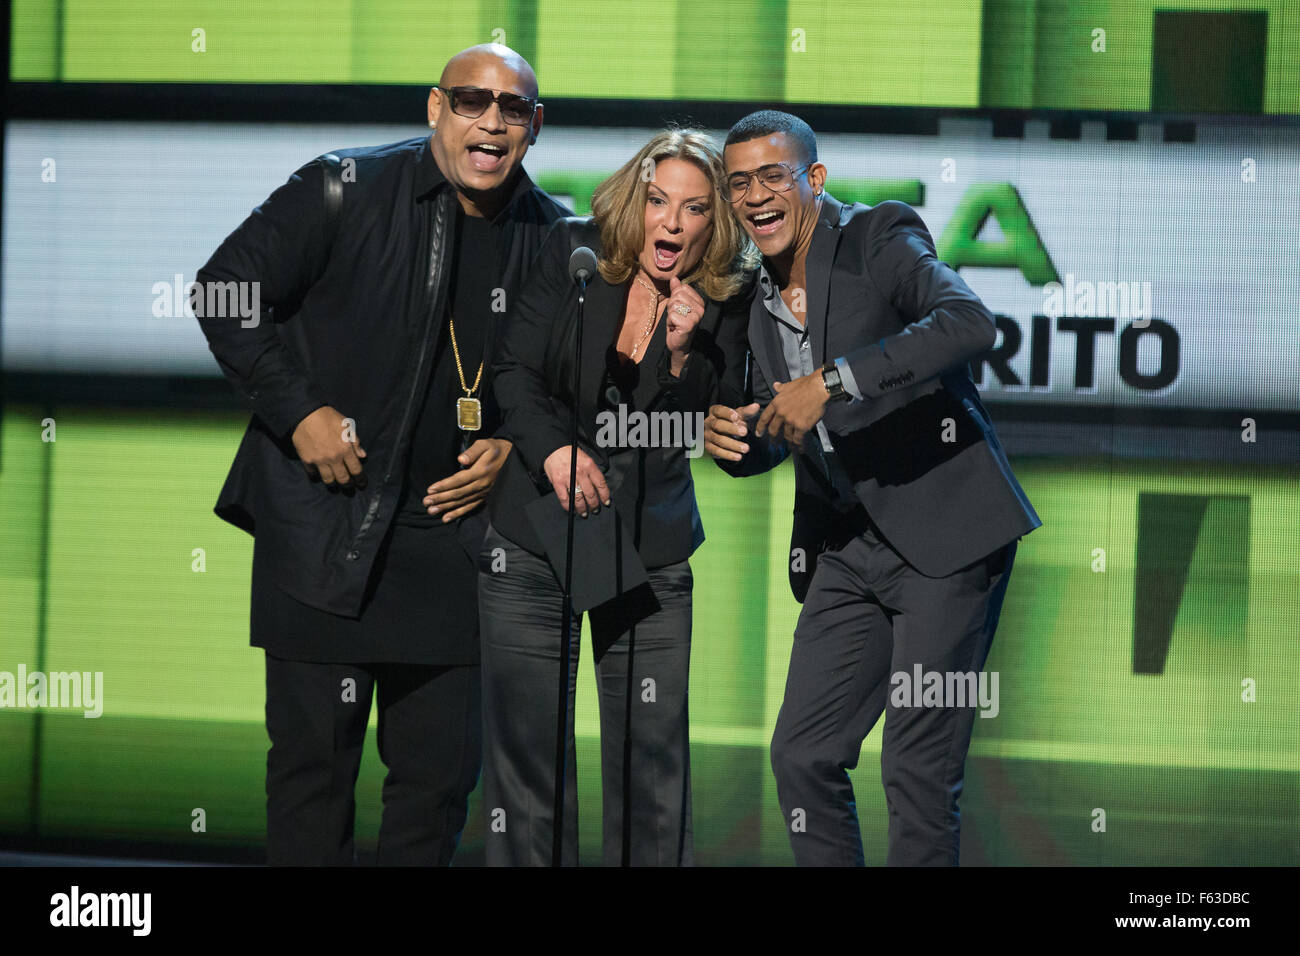 Celebrities perform onstage at the Latin American Music Awards at the Dolby Theatre  Featuring: Alexander Delgado, Ana Maria Polo, Randy Malcom Martinez Where: Los Angeles, California, United States When: 09 Oct 2015 Stock Photo